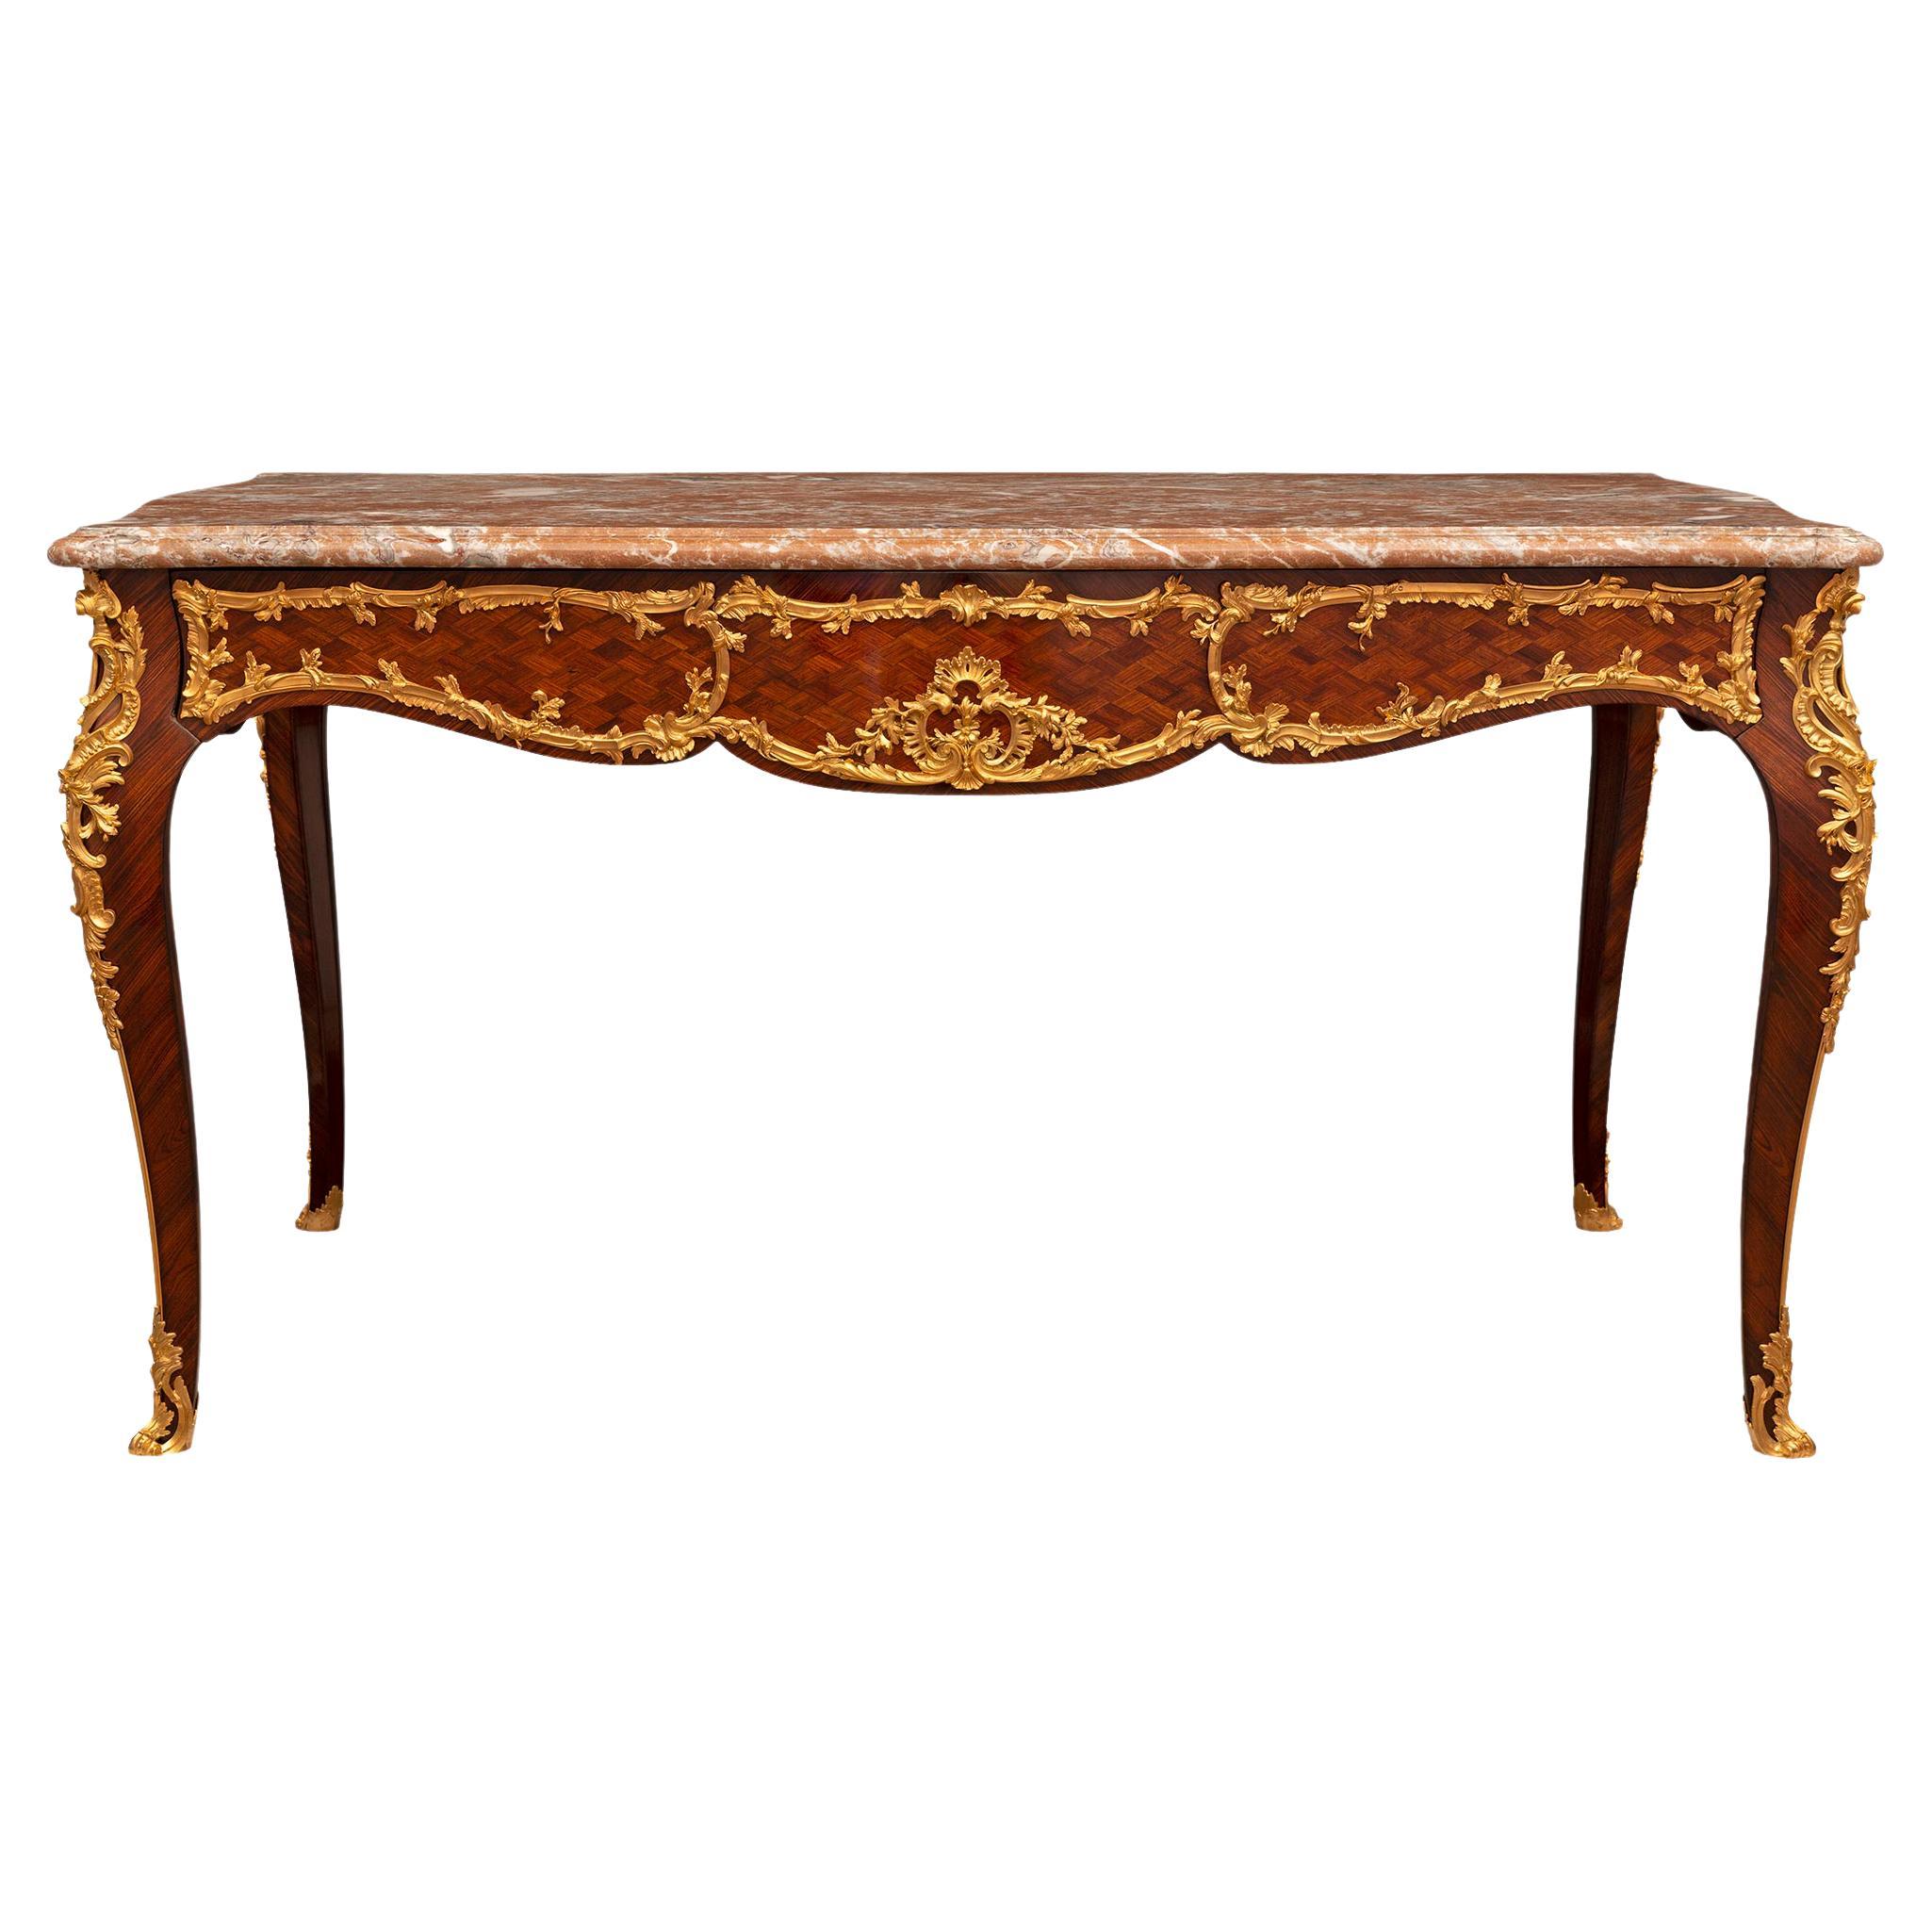 French 19th Century Louis XV Style Tulipwood and Ormolu Center Table